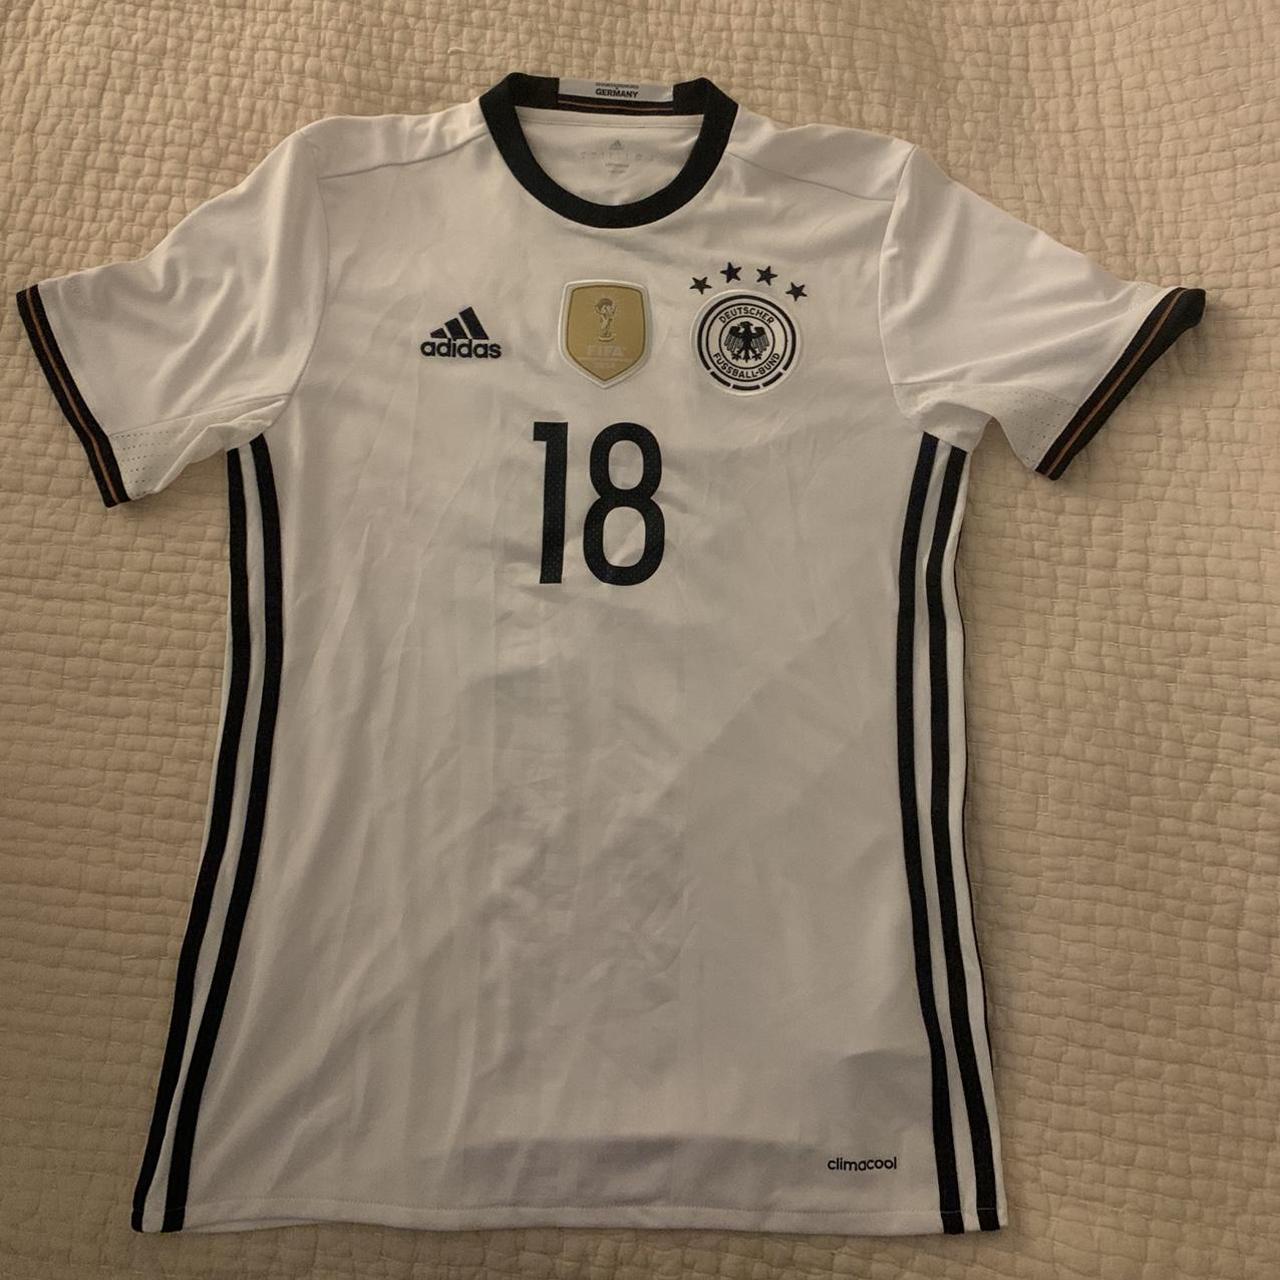 Adidas Germany Home Jersey - White/Black, S